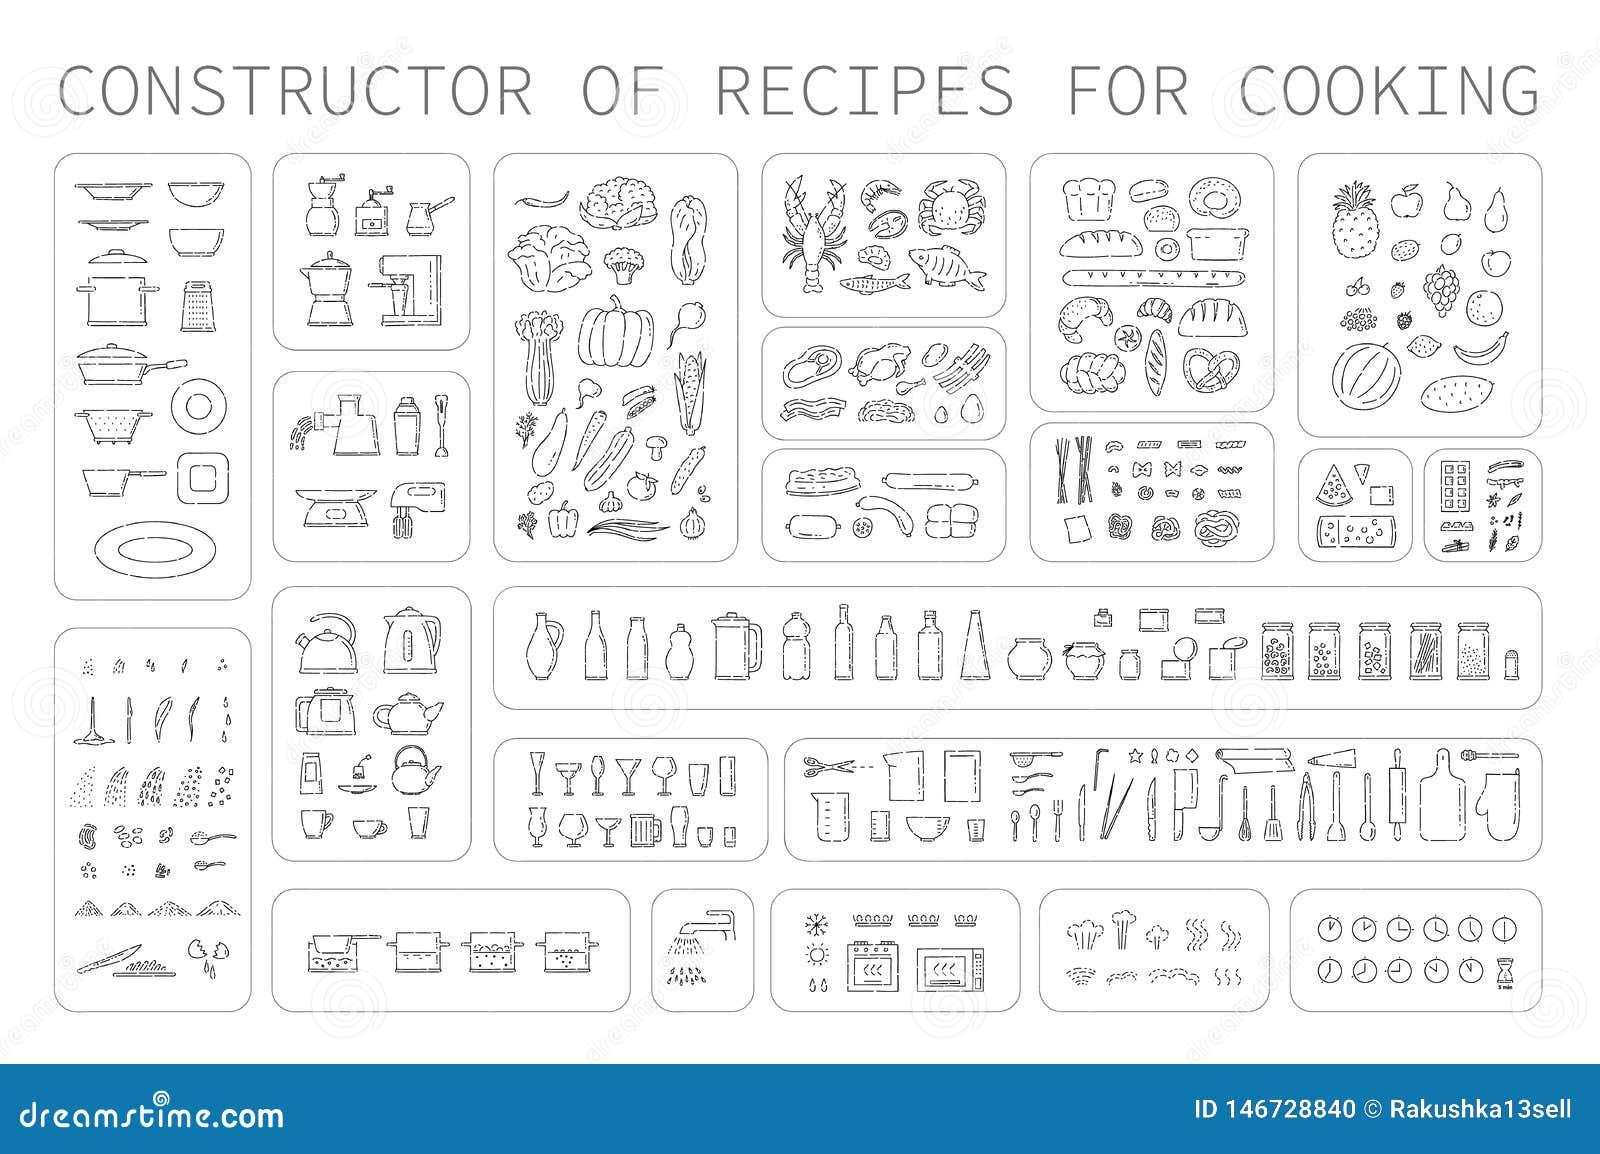 cooking instruction icons of different food utensils and appliances for kitchen. step guide constructor set line art